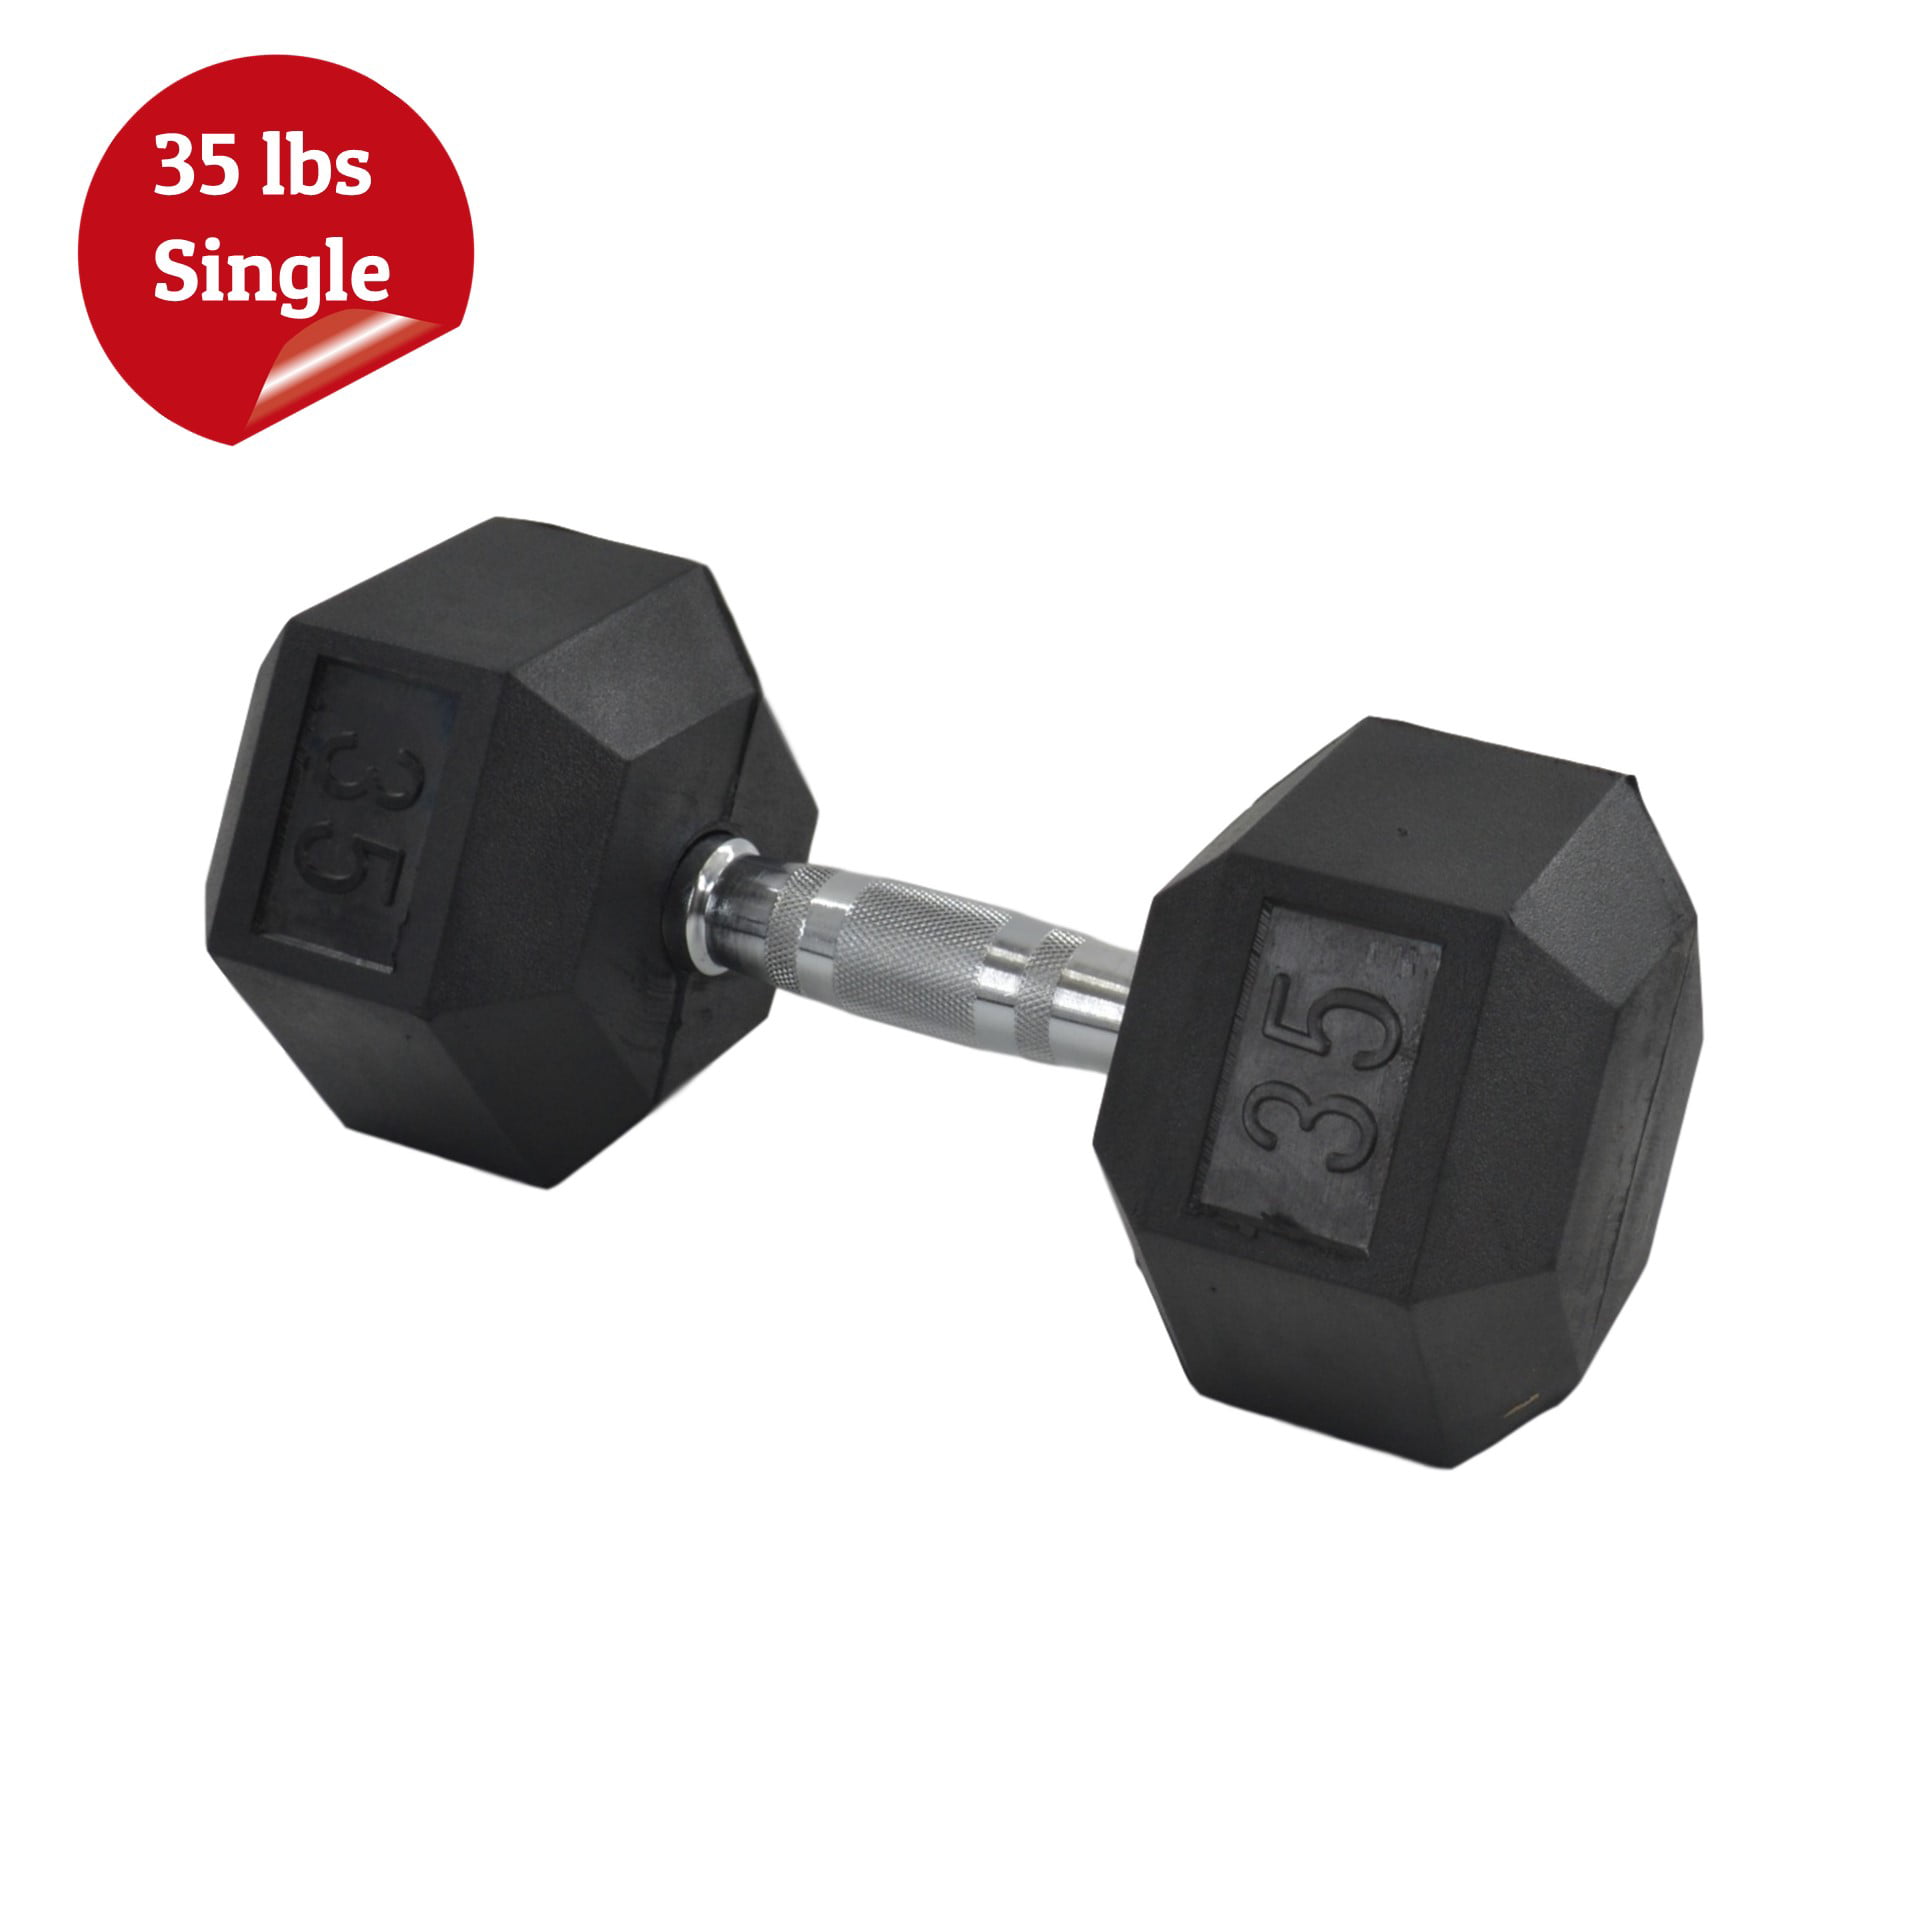 Home Gym NEW Iron Cast Hex Dumbbells Weights 5 10 15 20 25 30 35 45 50 LBS 